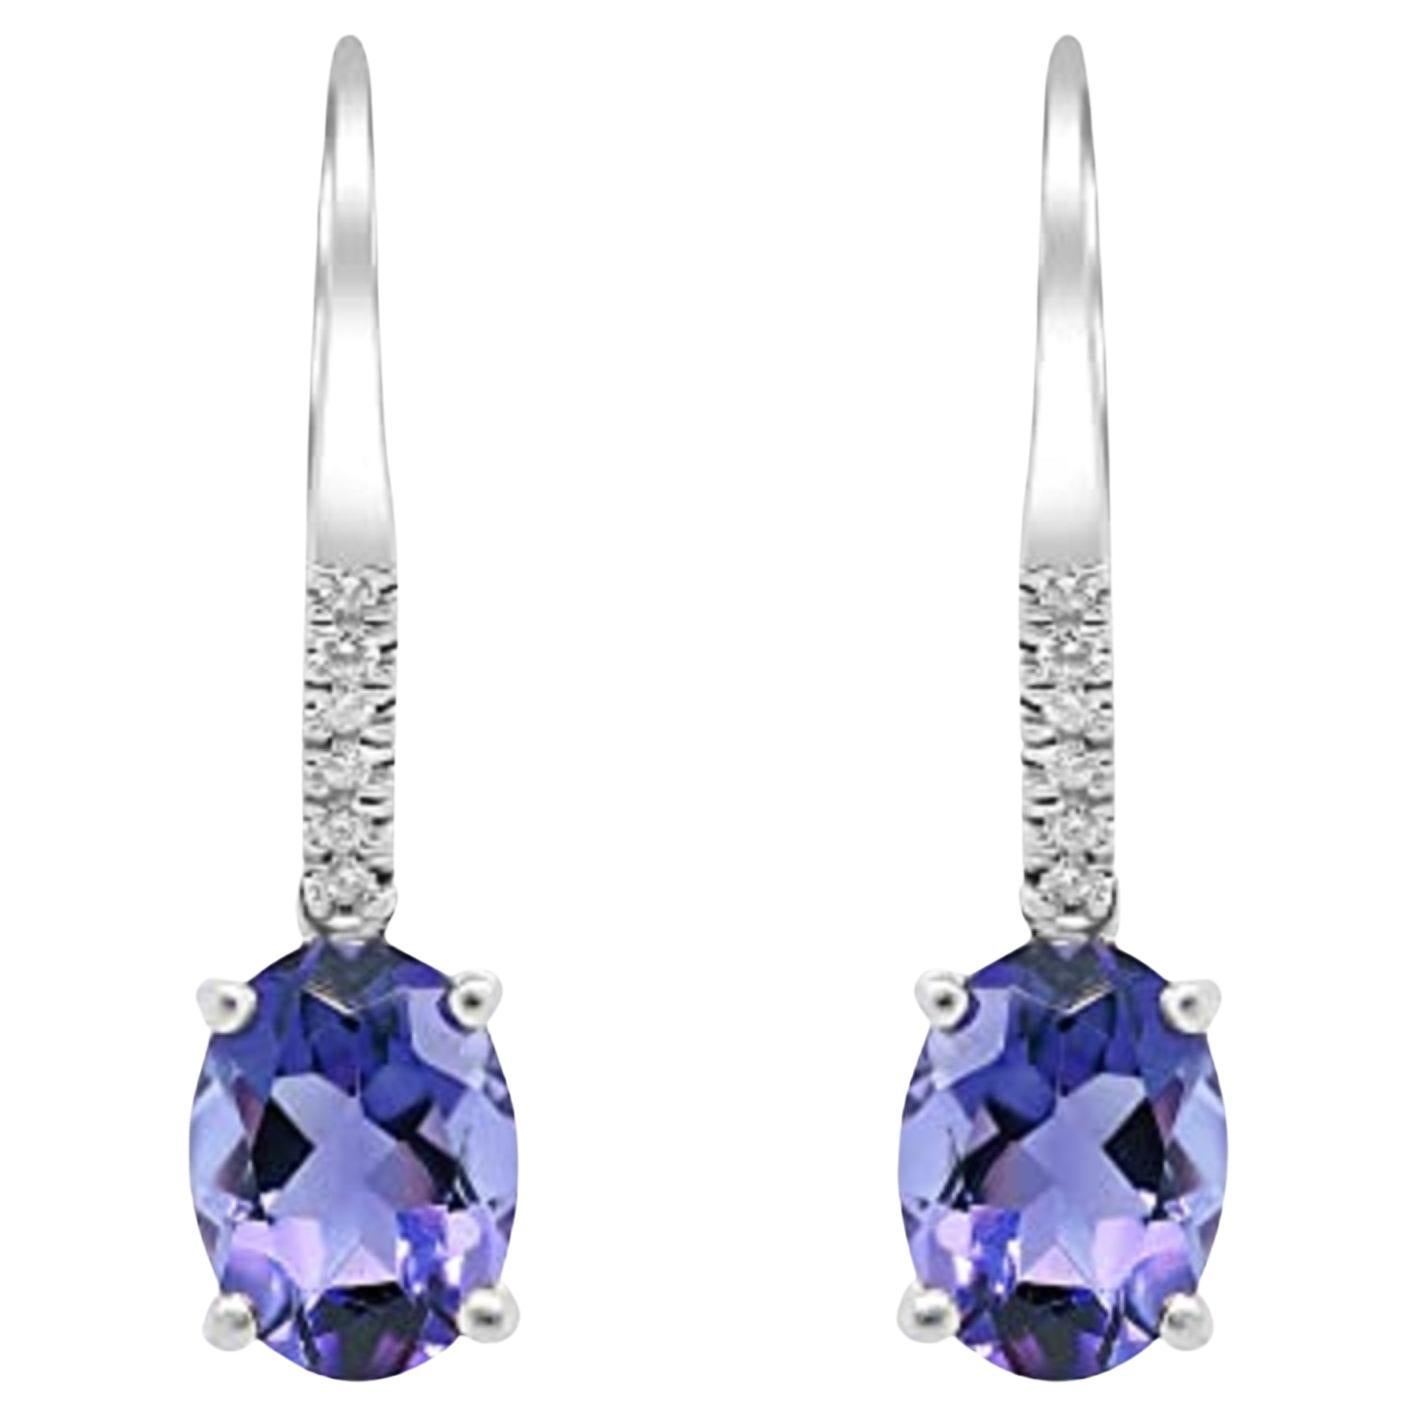 Gin and Grace 14K White Gold Genuine Tanzanite Earrings with Diamonds For Women